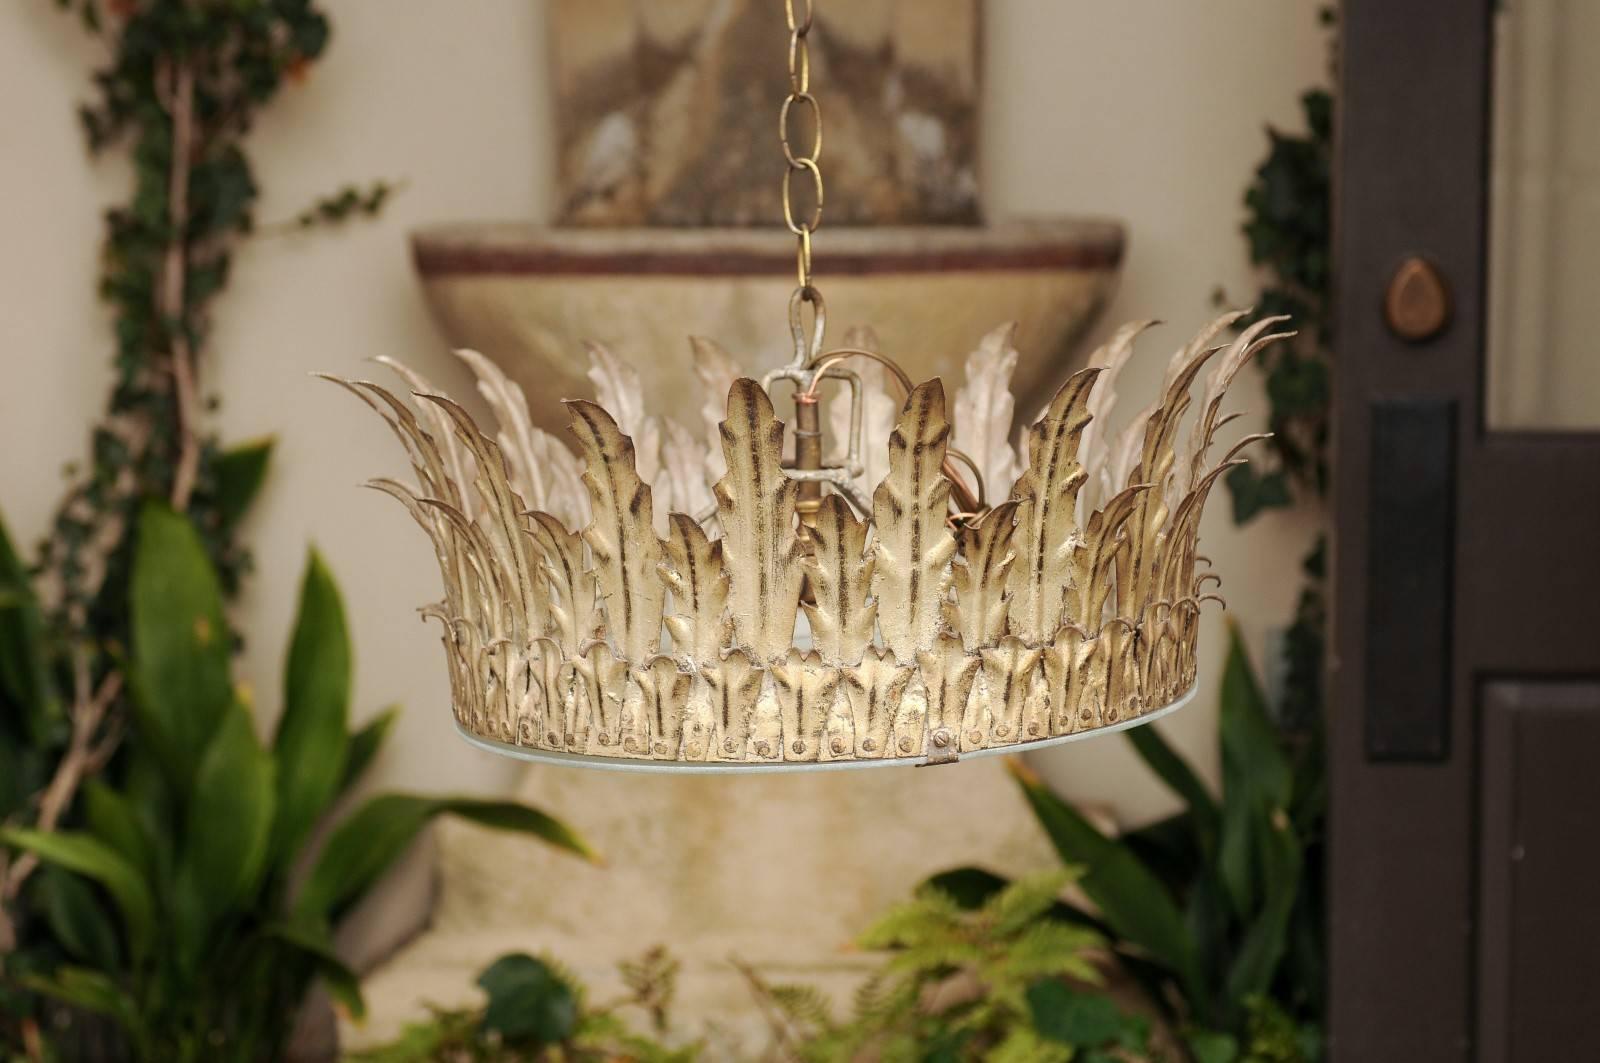 Frosted Spanish Vintage Silver Gilt Metal Crown Light Fixture with Foliage Motifs, 1950s